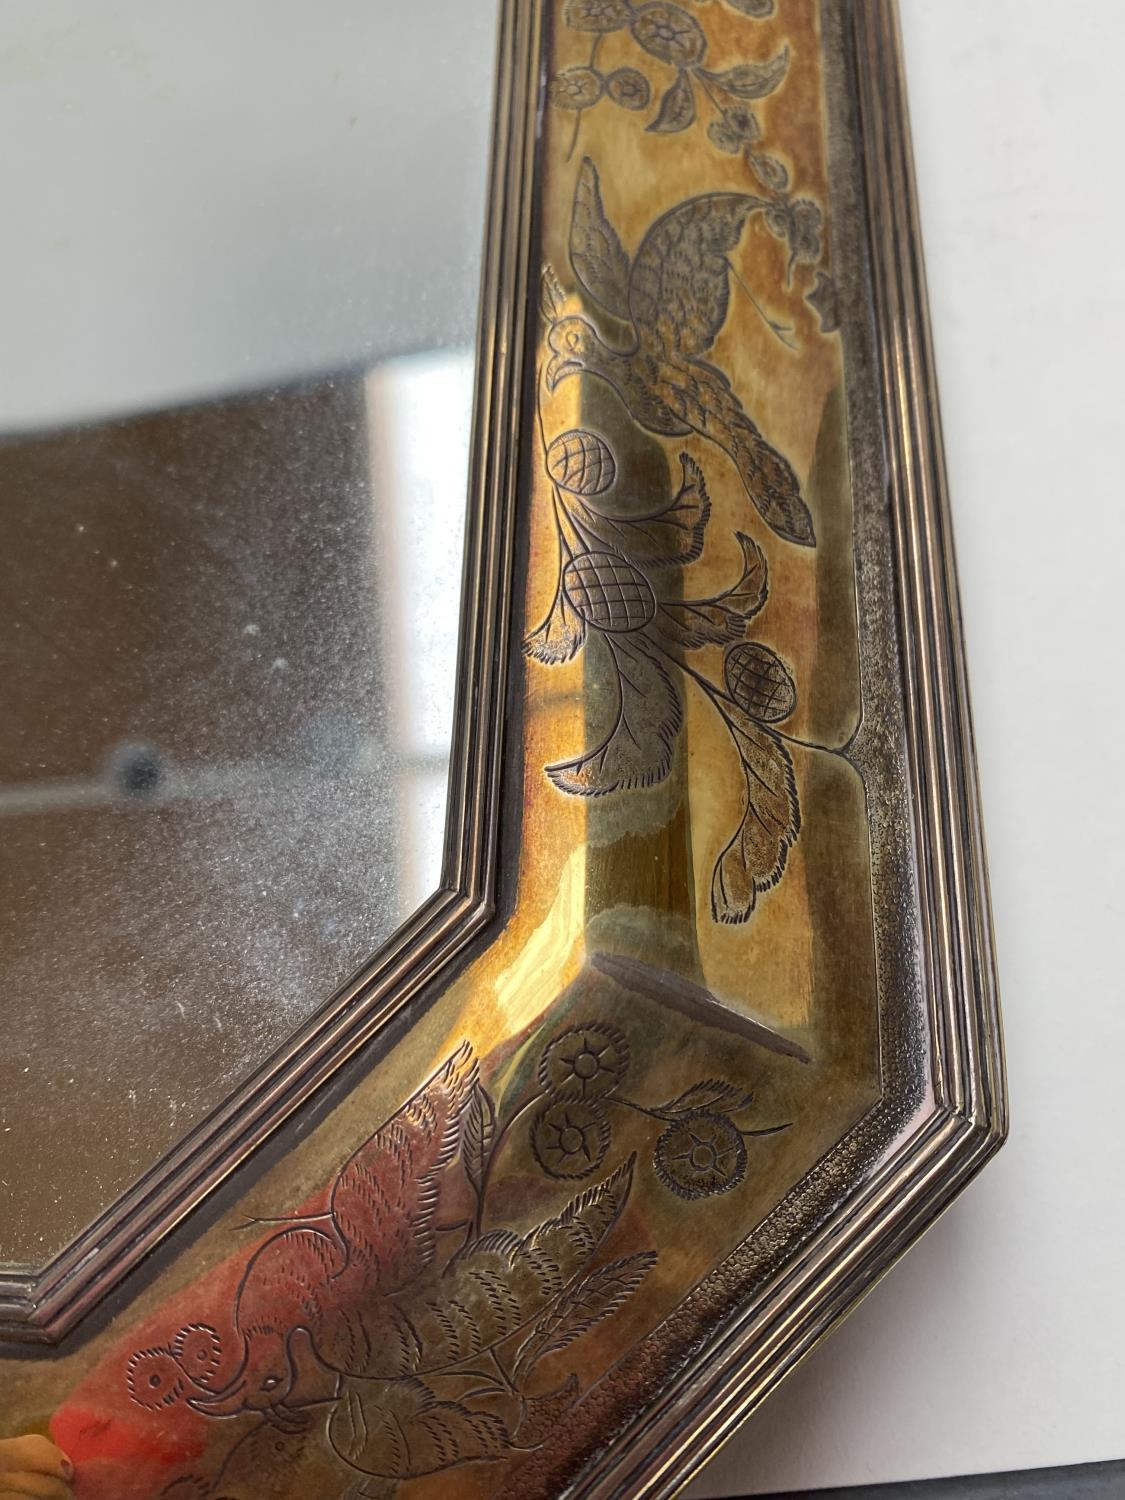 Hallmarked silver mirror set within an engraved frame, overall 45.5 long, x 36 cm wide, backed on - Image 5 of 6